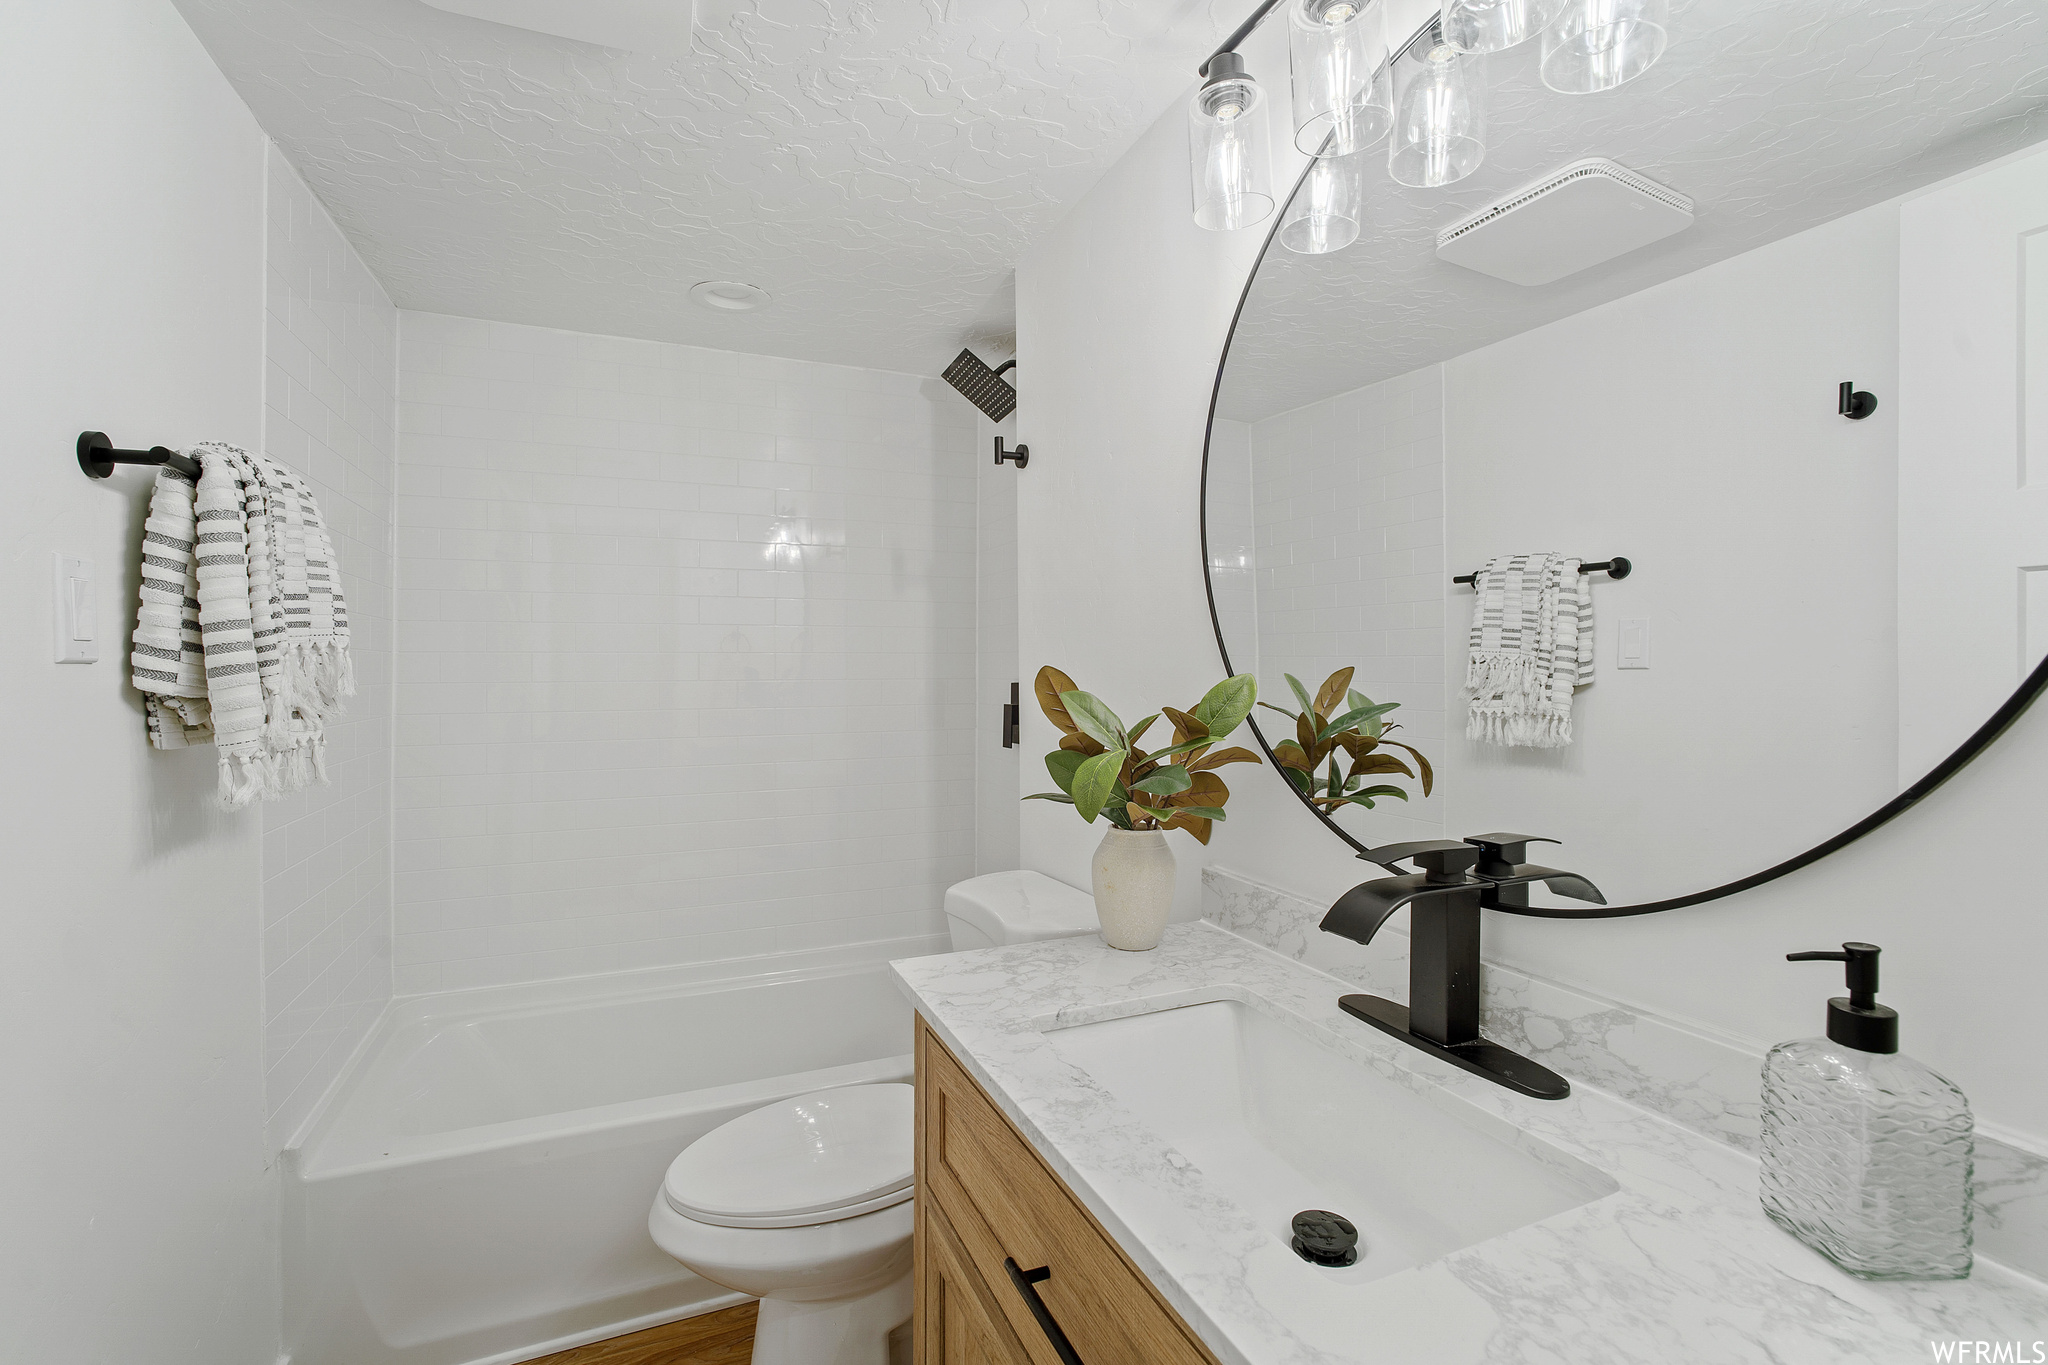 Full bathroom with tiled shower / bath, vanity, toilet, and a textured ceiling